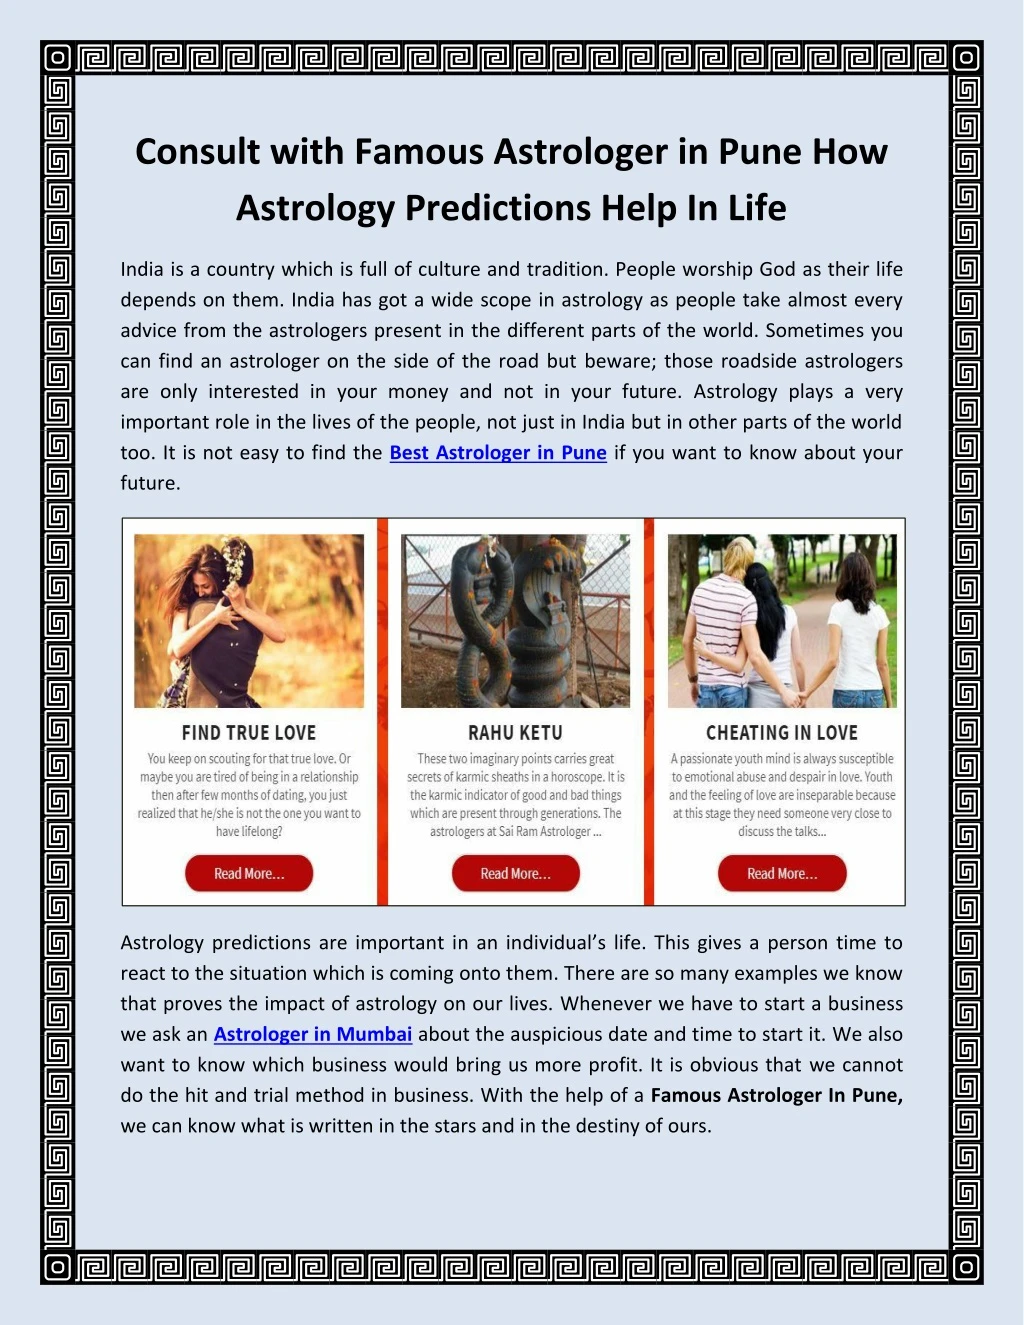 consult with famous astrologer in pune